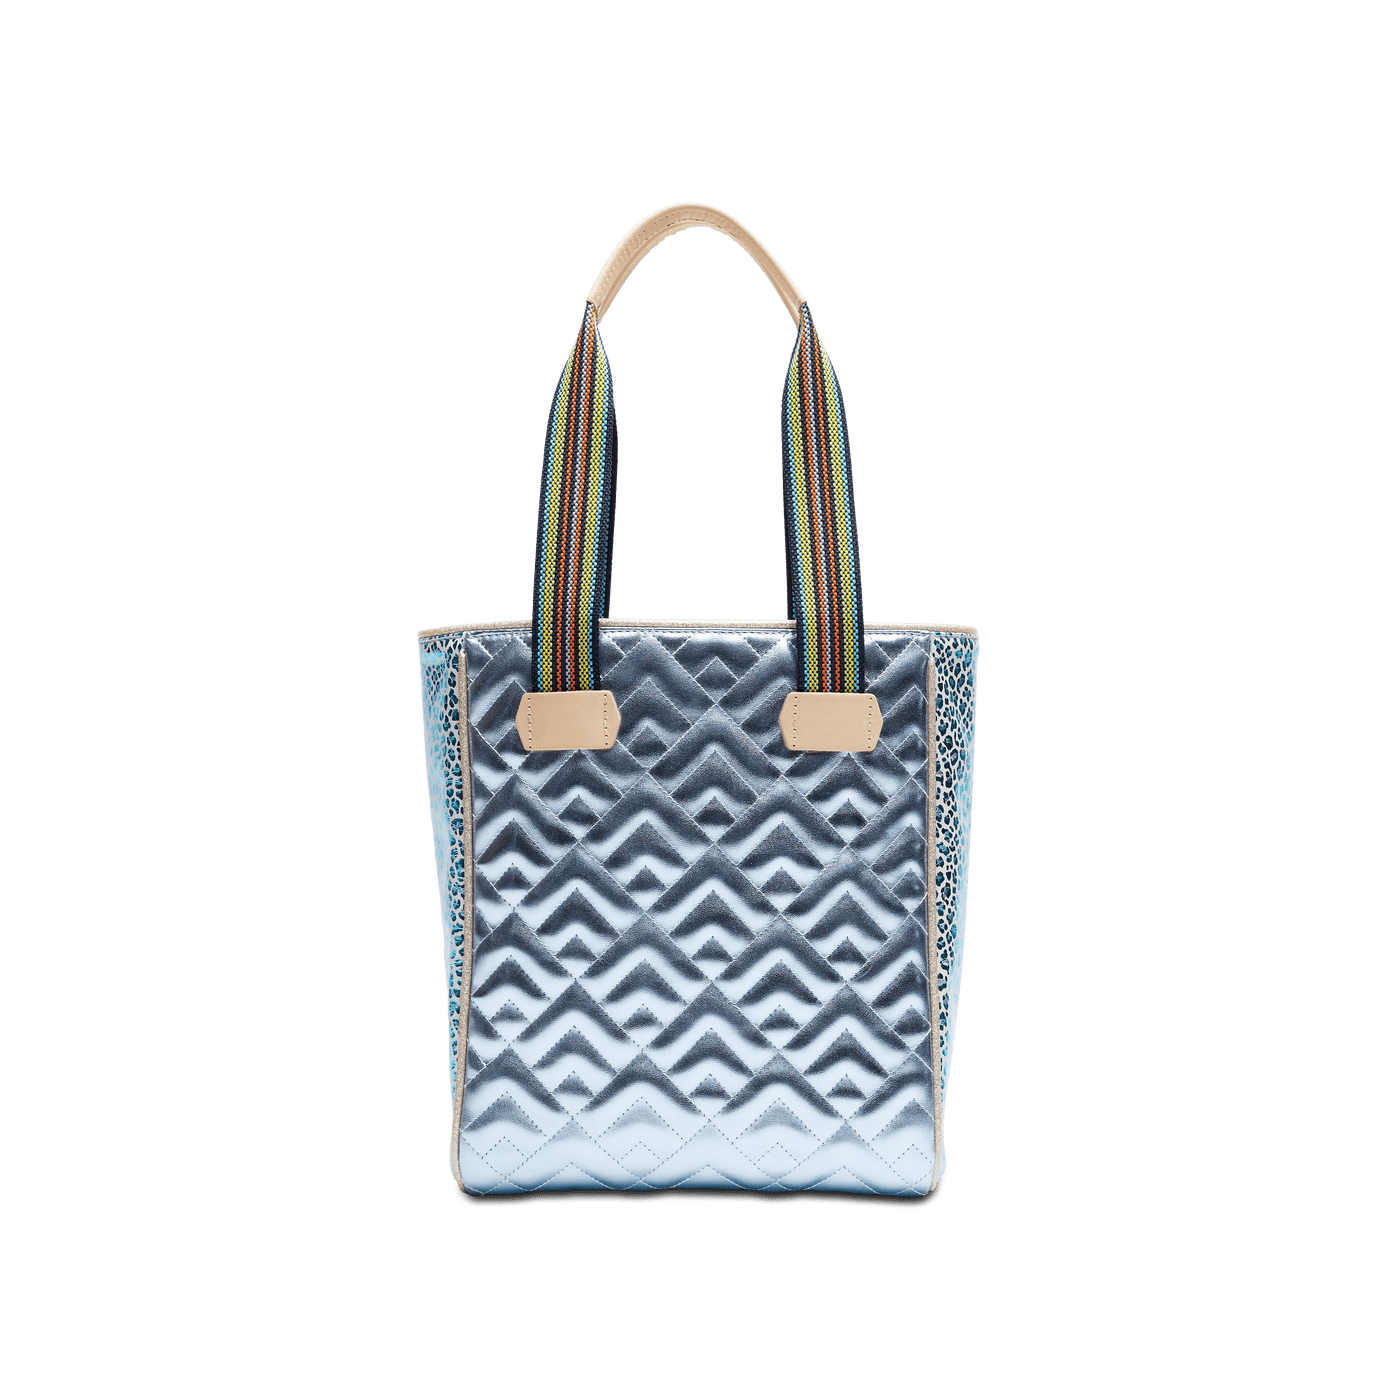 Consuela Chica Tote - Kat-110 Handbags-Consuela-Market Street Nest, Fashionable Clothing, Shoes and Home Décor Located in Mabank, TX